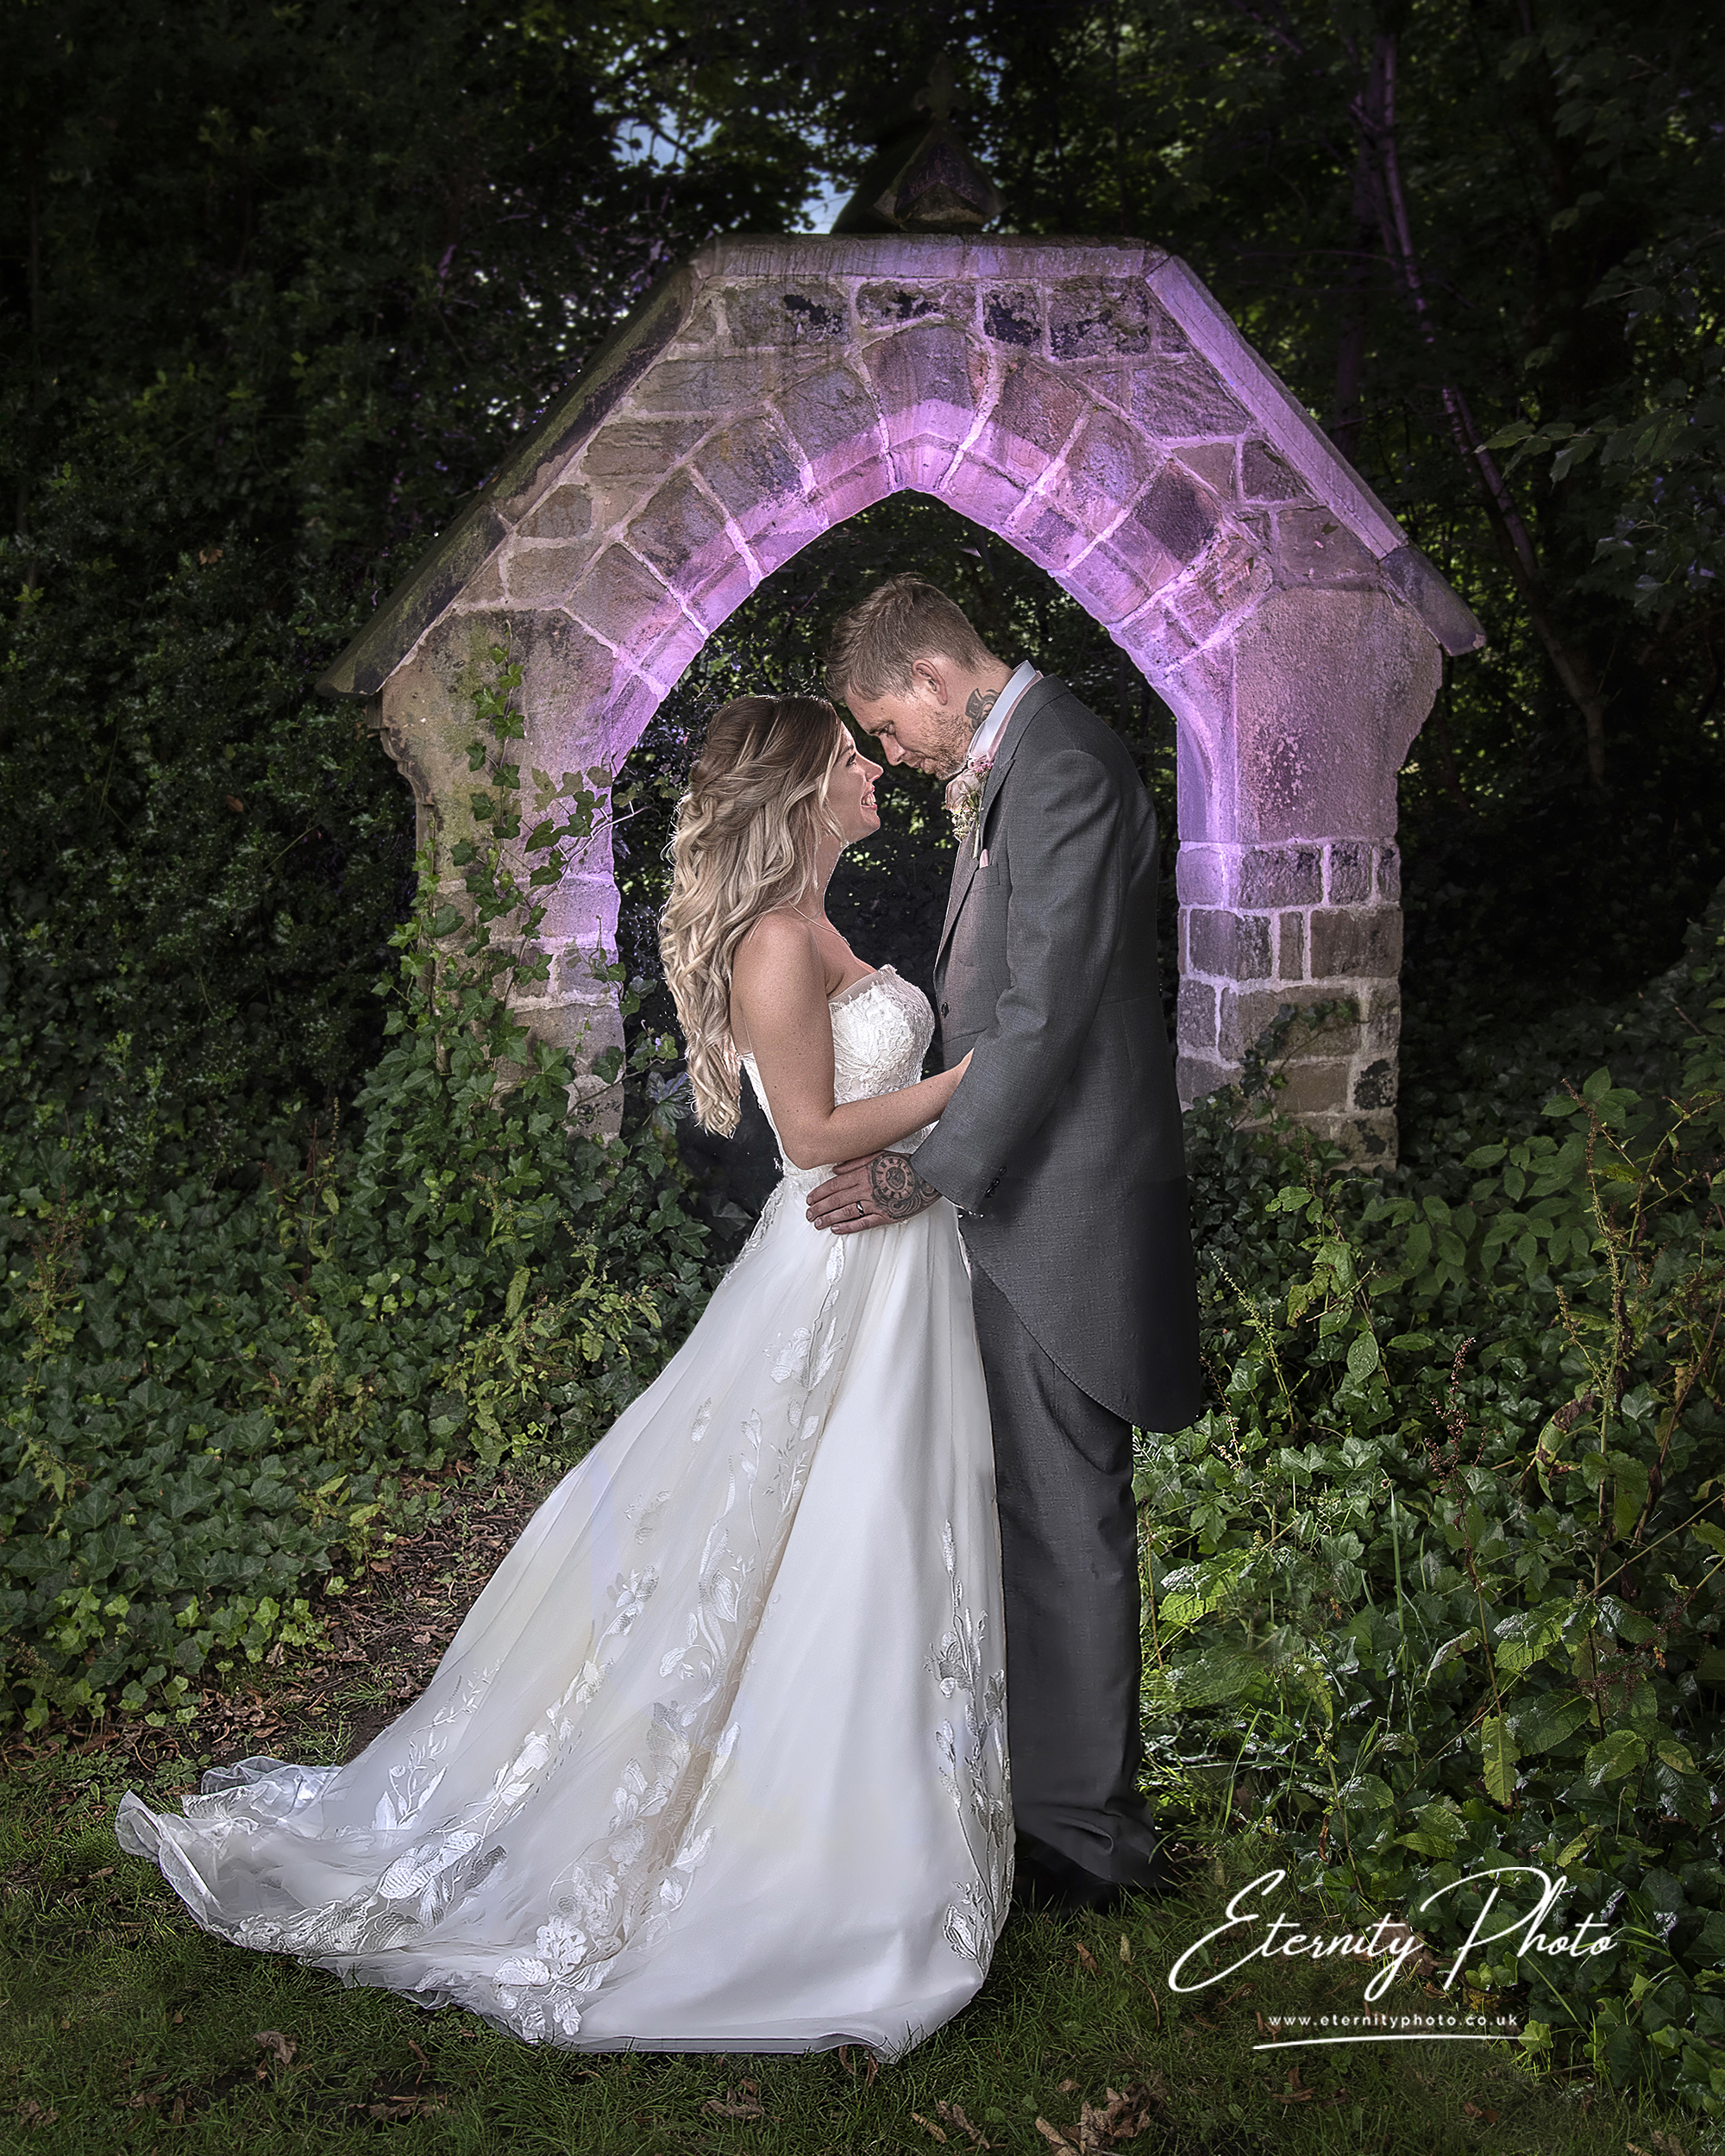 Bride and groom embracing under stone archway outdoors.